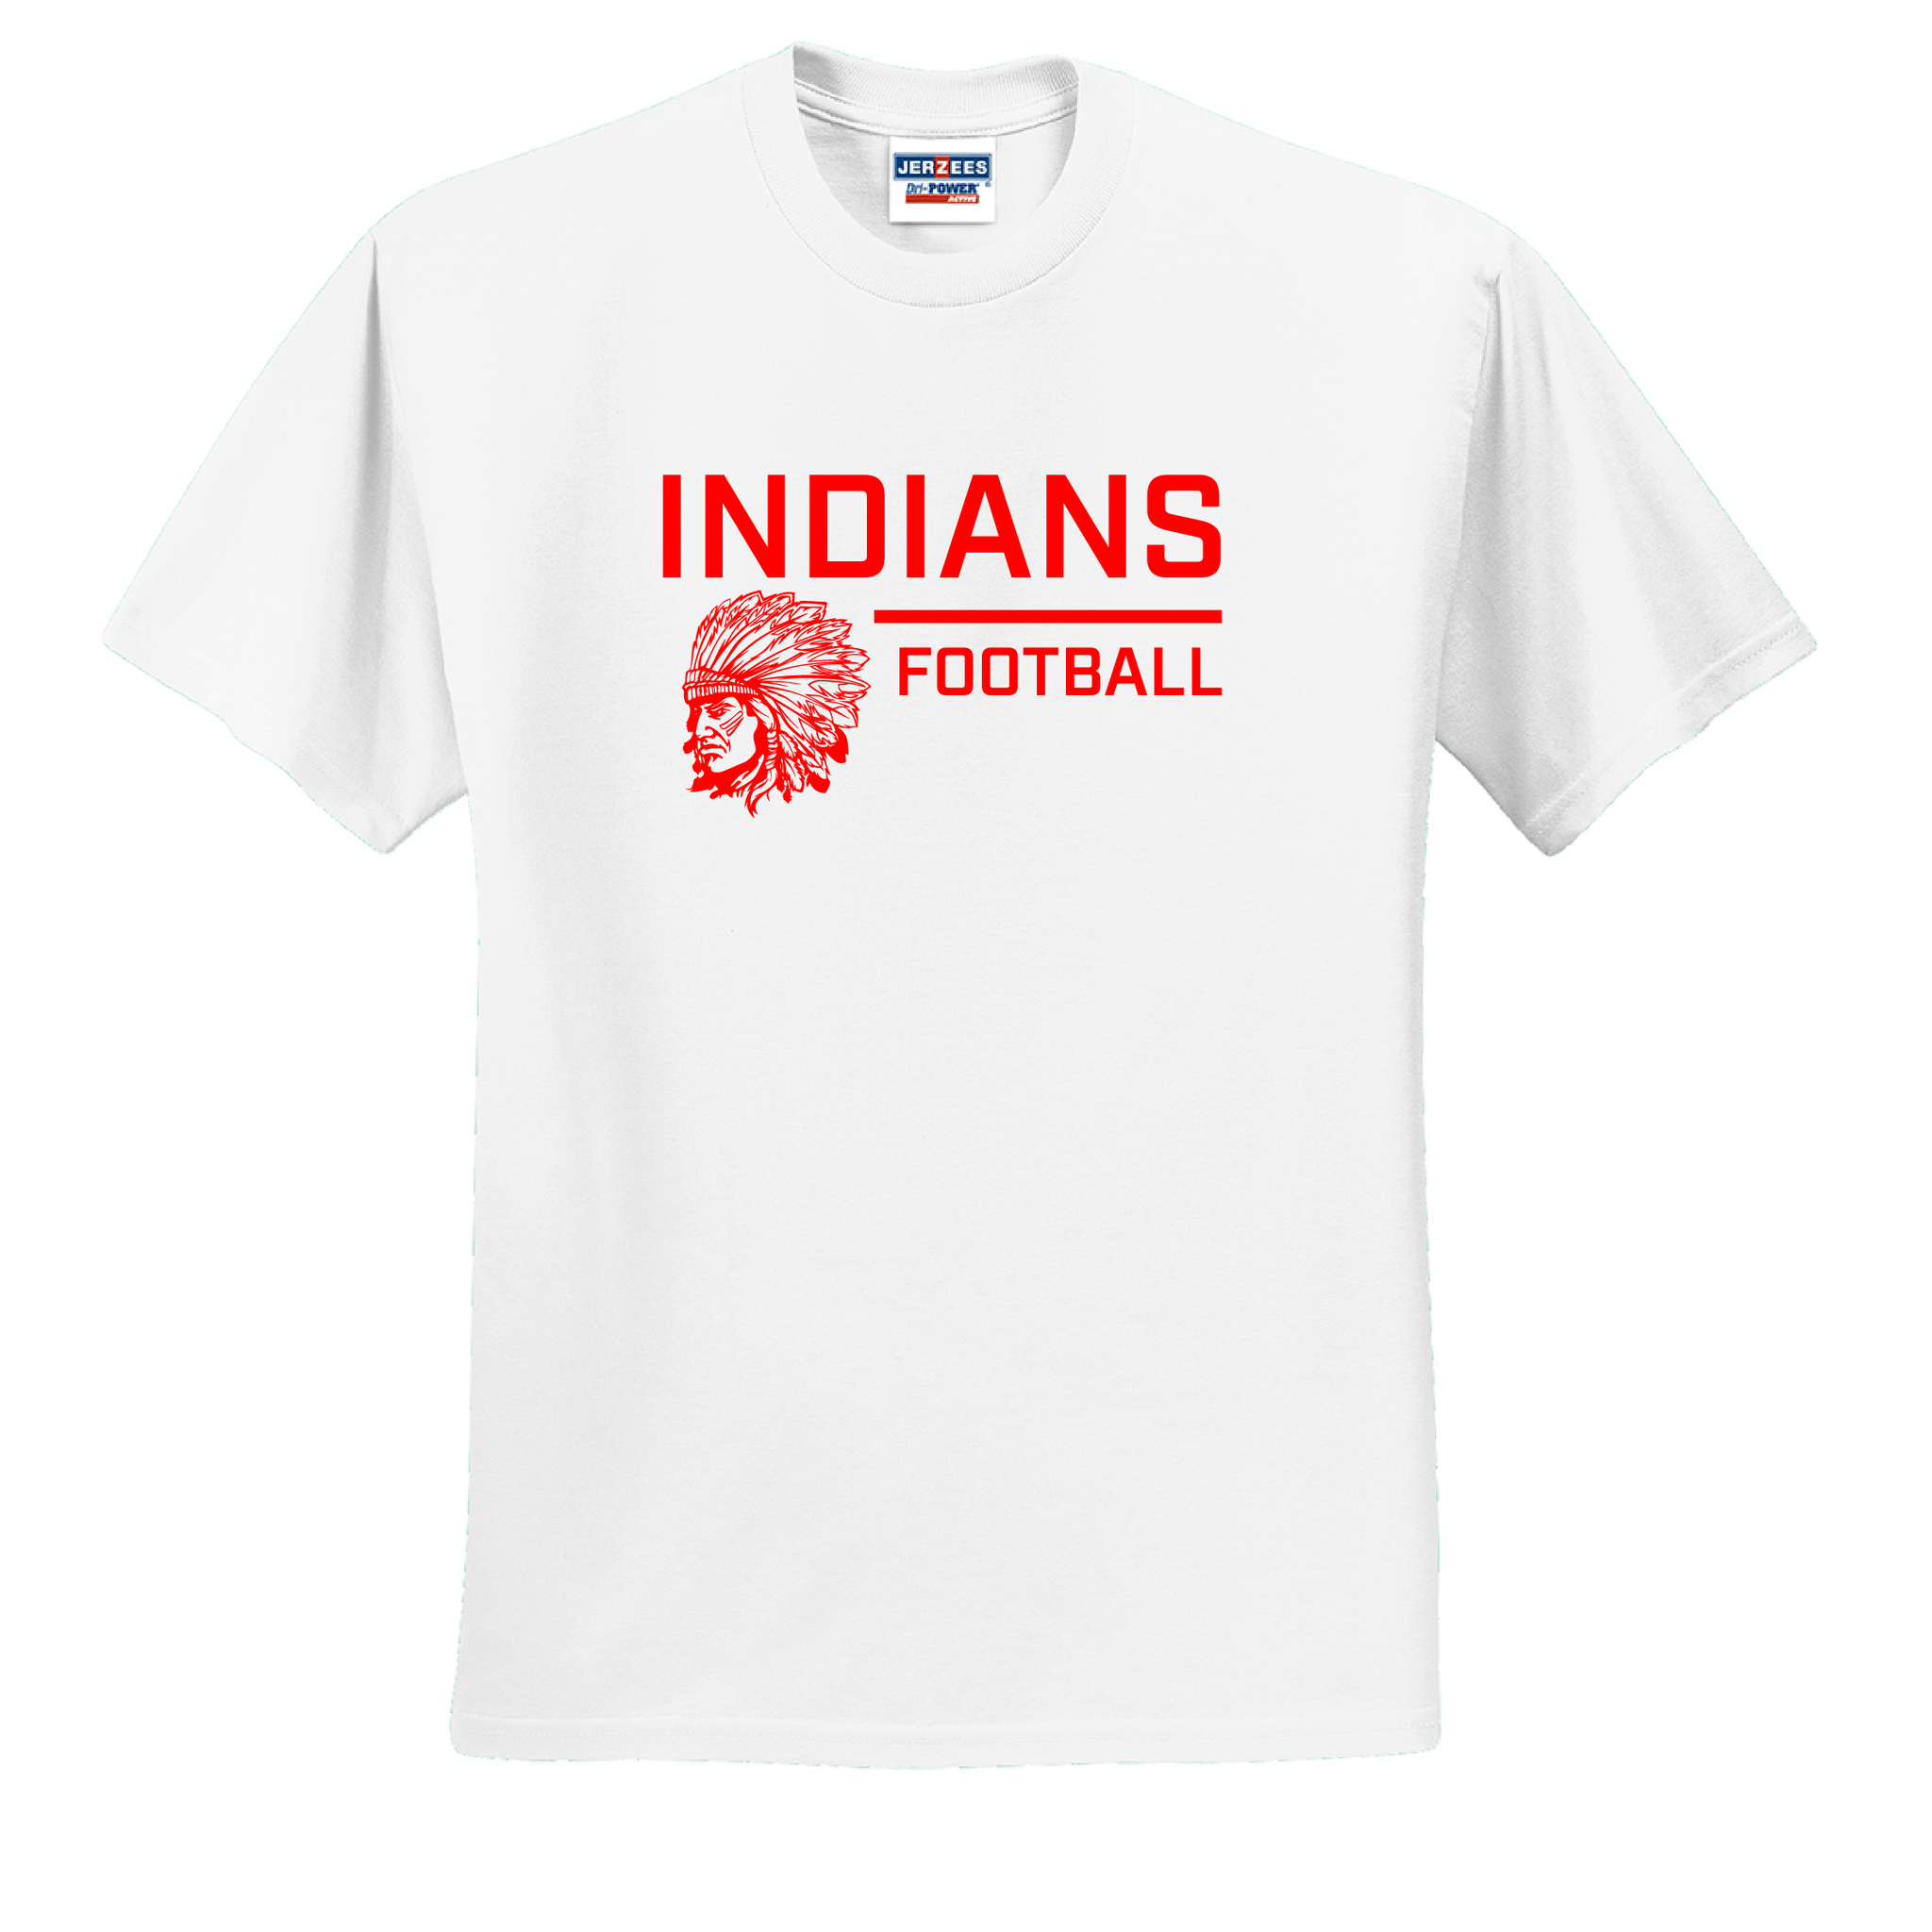 Mad River Indians Football T-Shirt